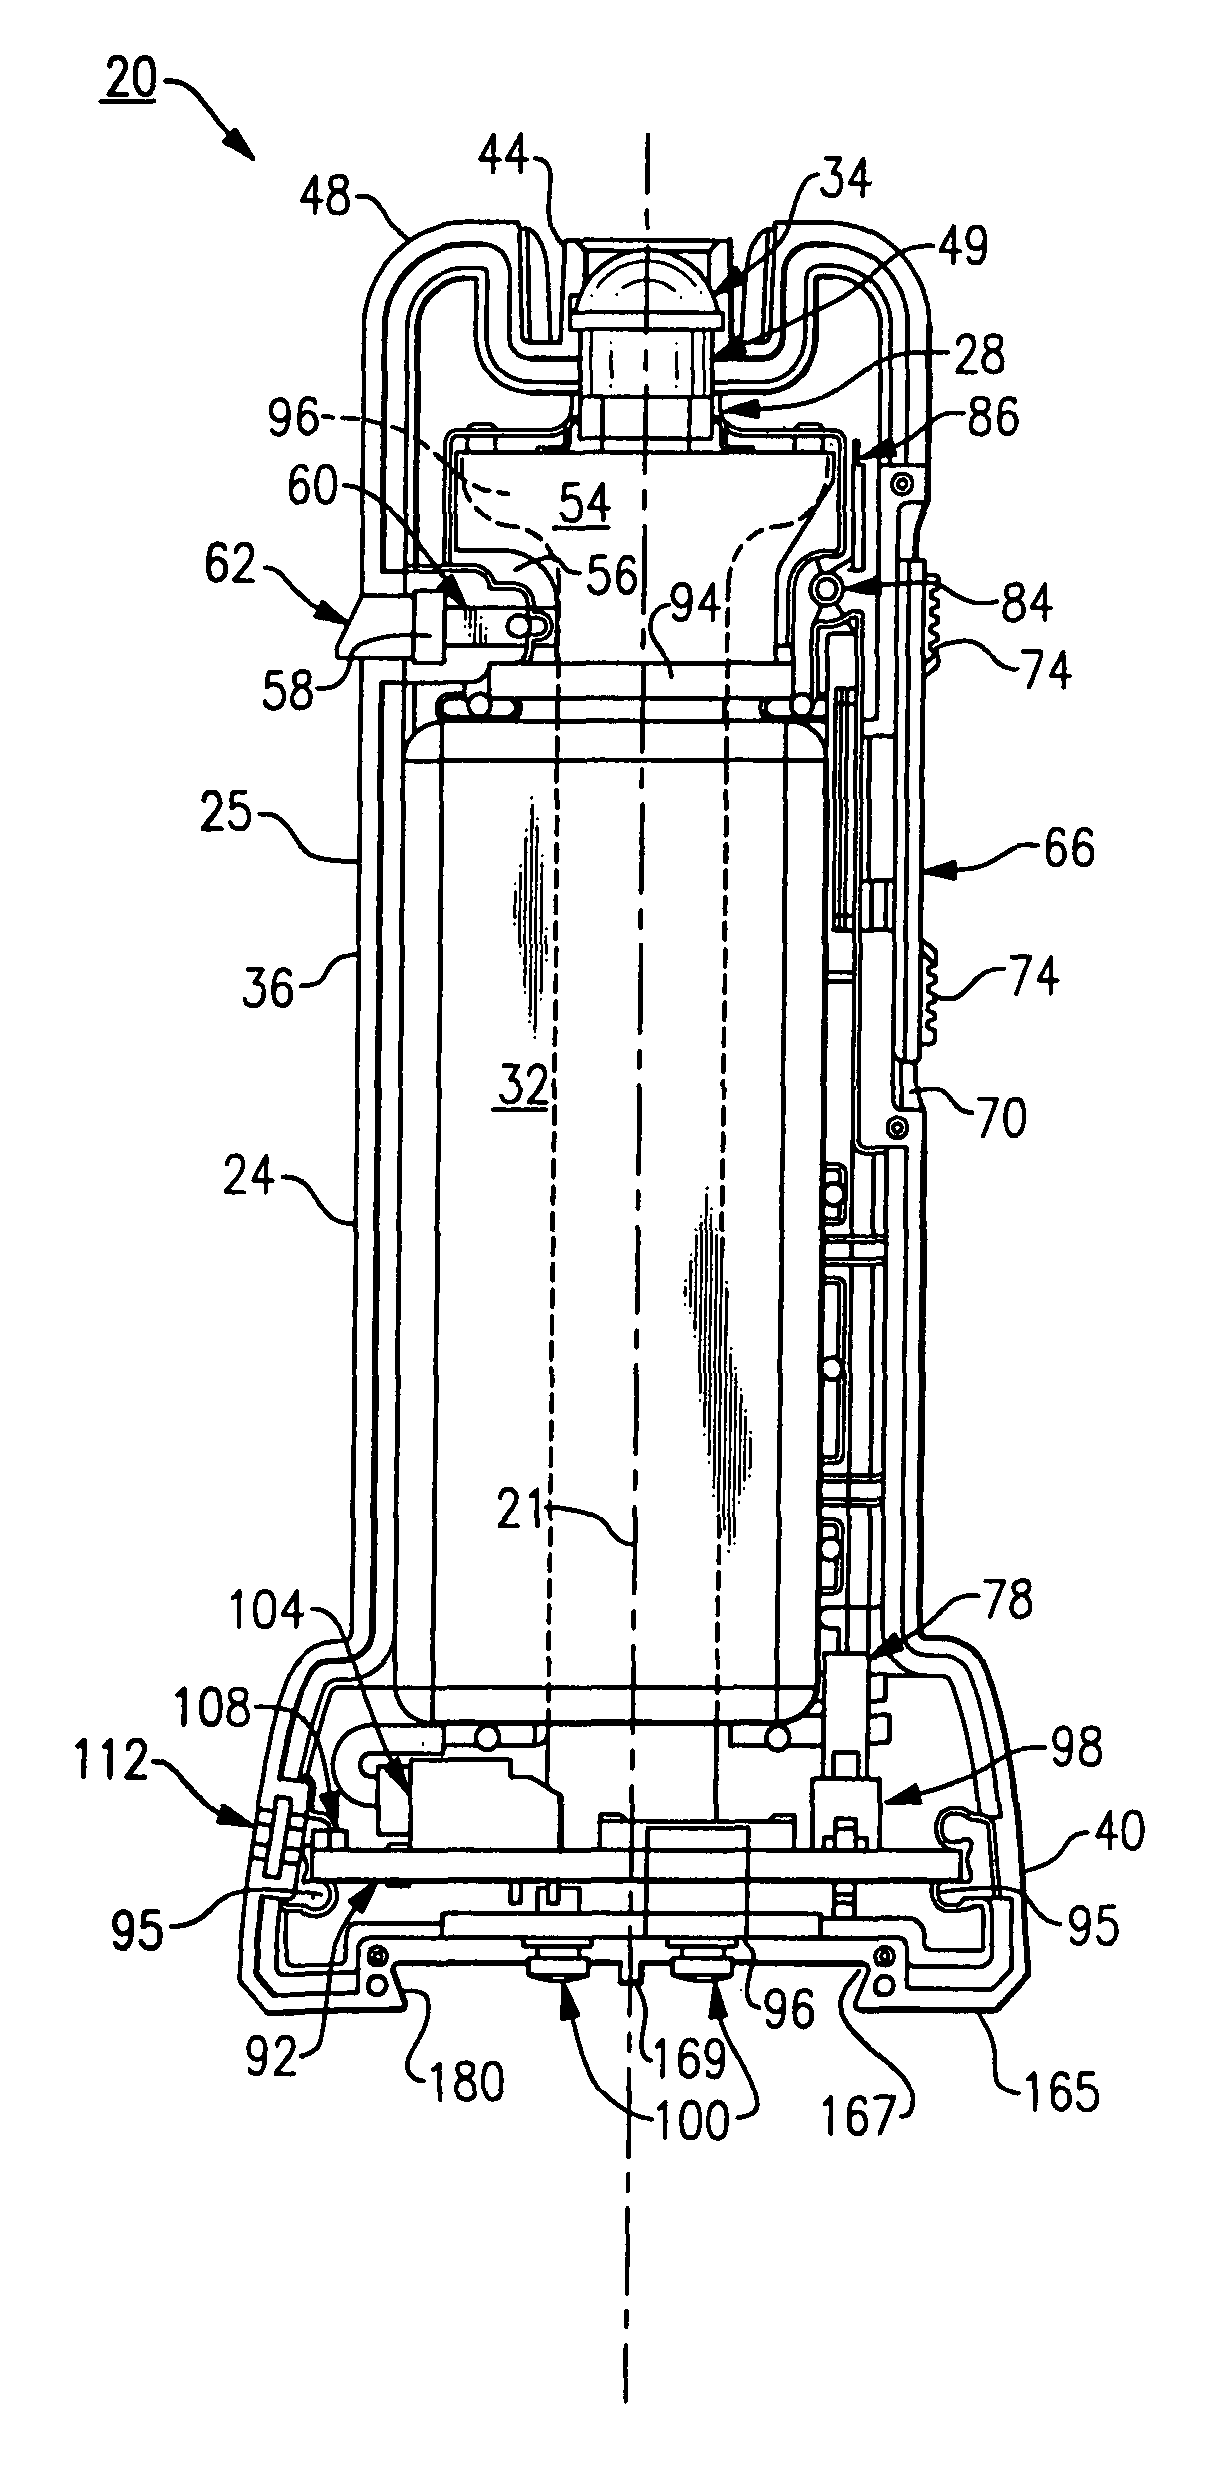 Power connections and interface for compact illuminator assembly